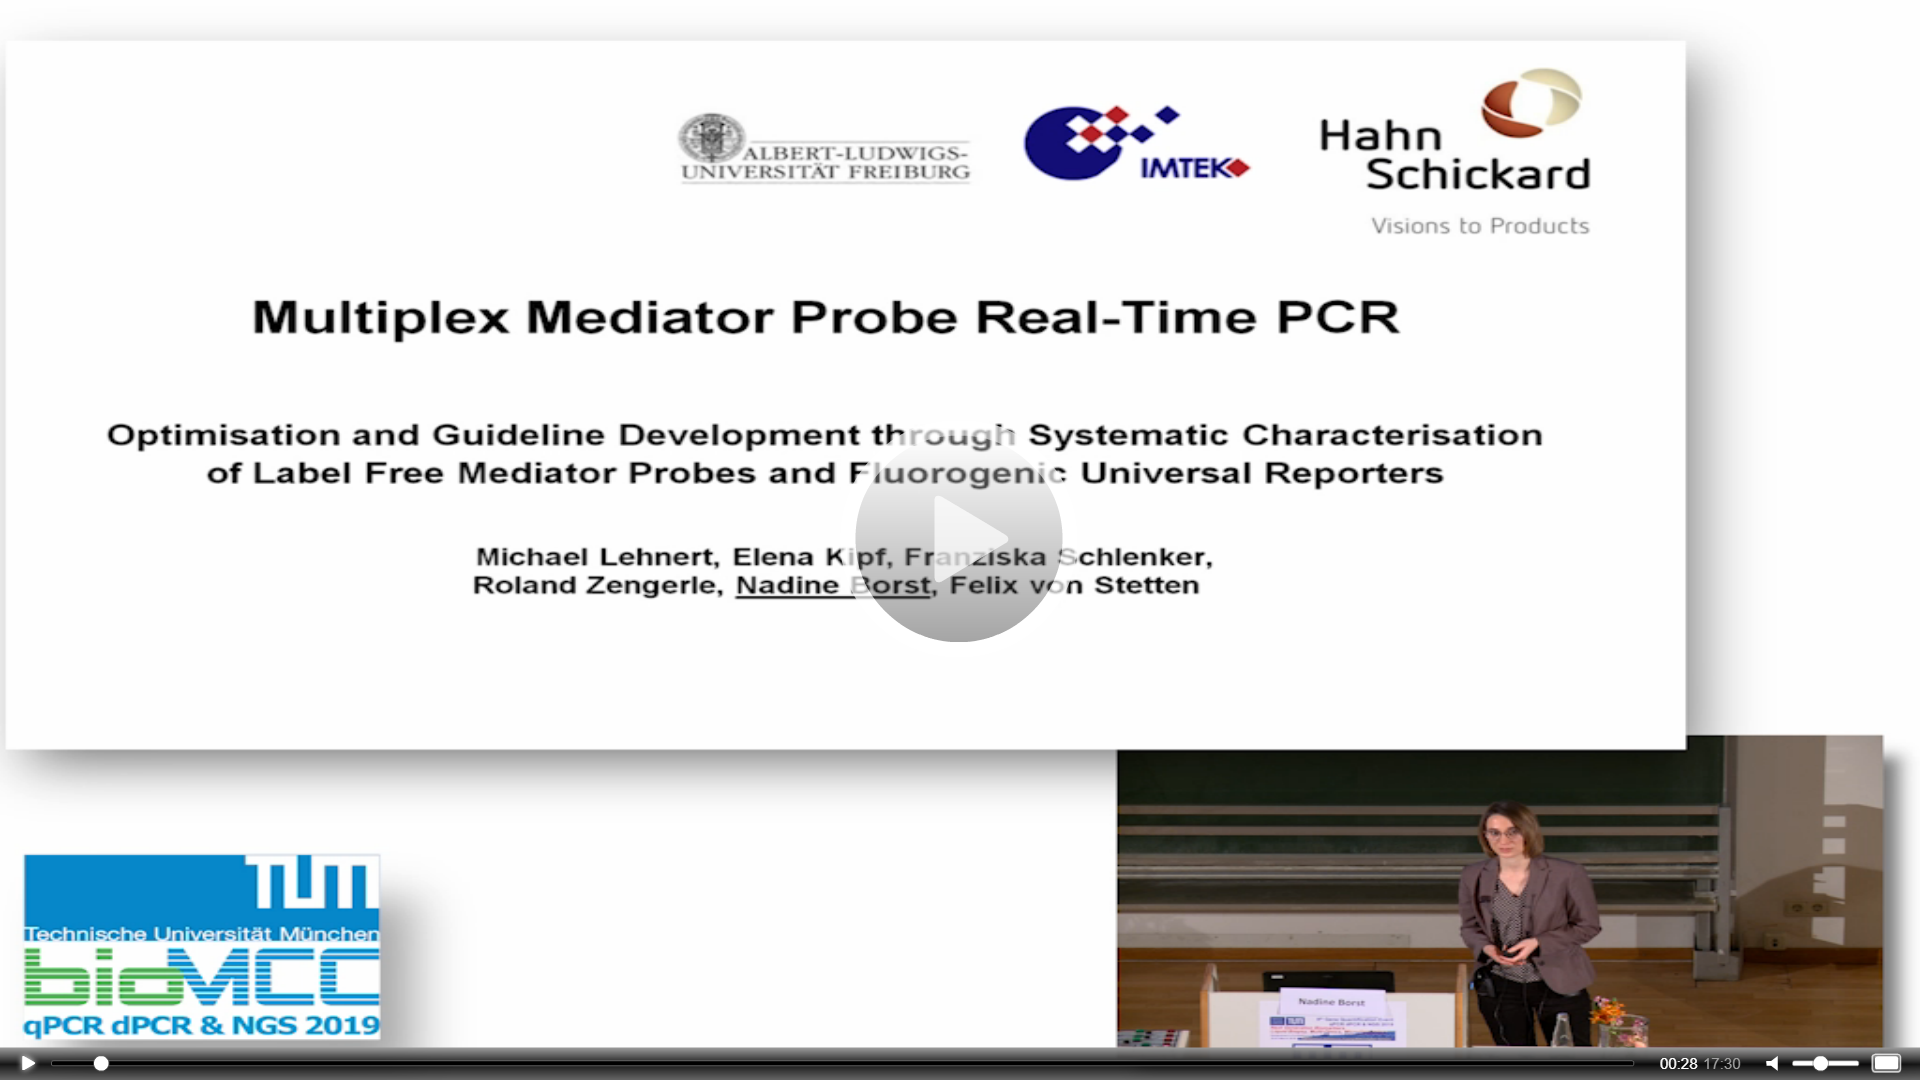 Multiplex Mediator Probe Real-Time PCR: Optimisation and Guideline Development through Systematic Characterisation of Label Free Mediator Probes and Fluorogenic Universal Reporters